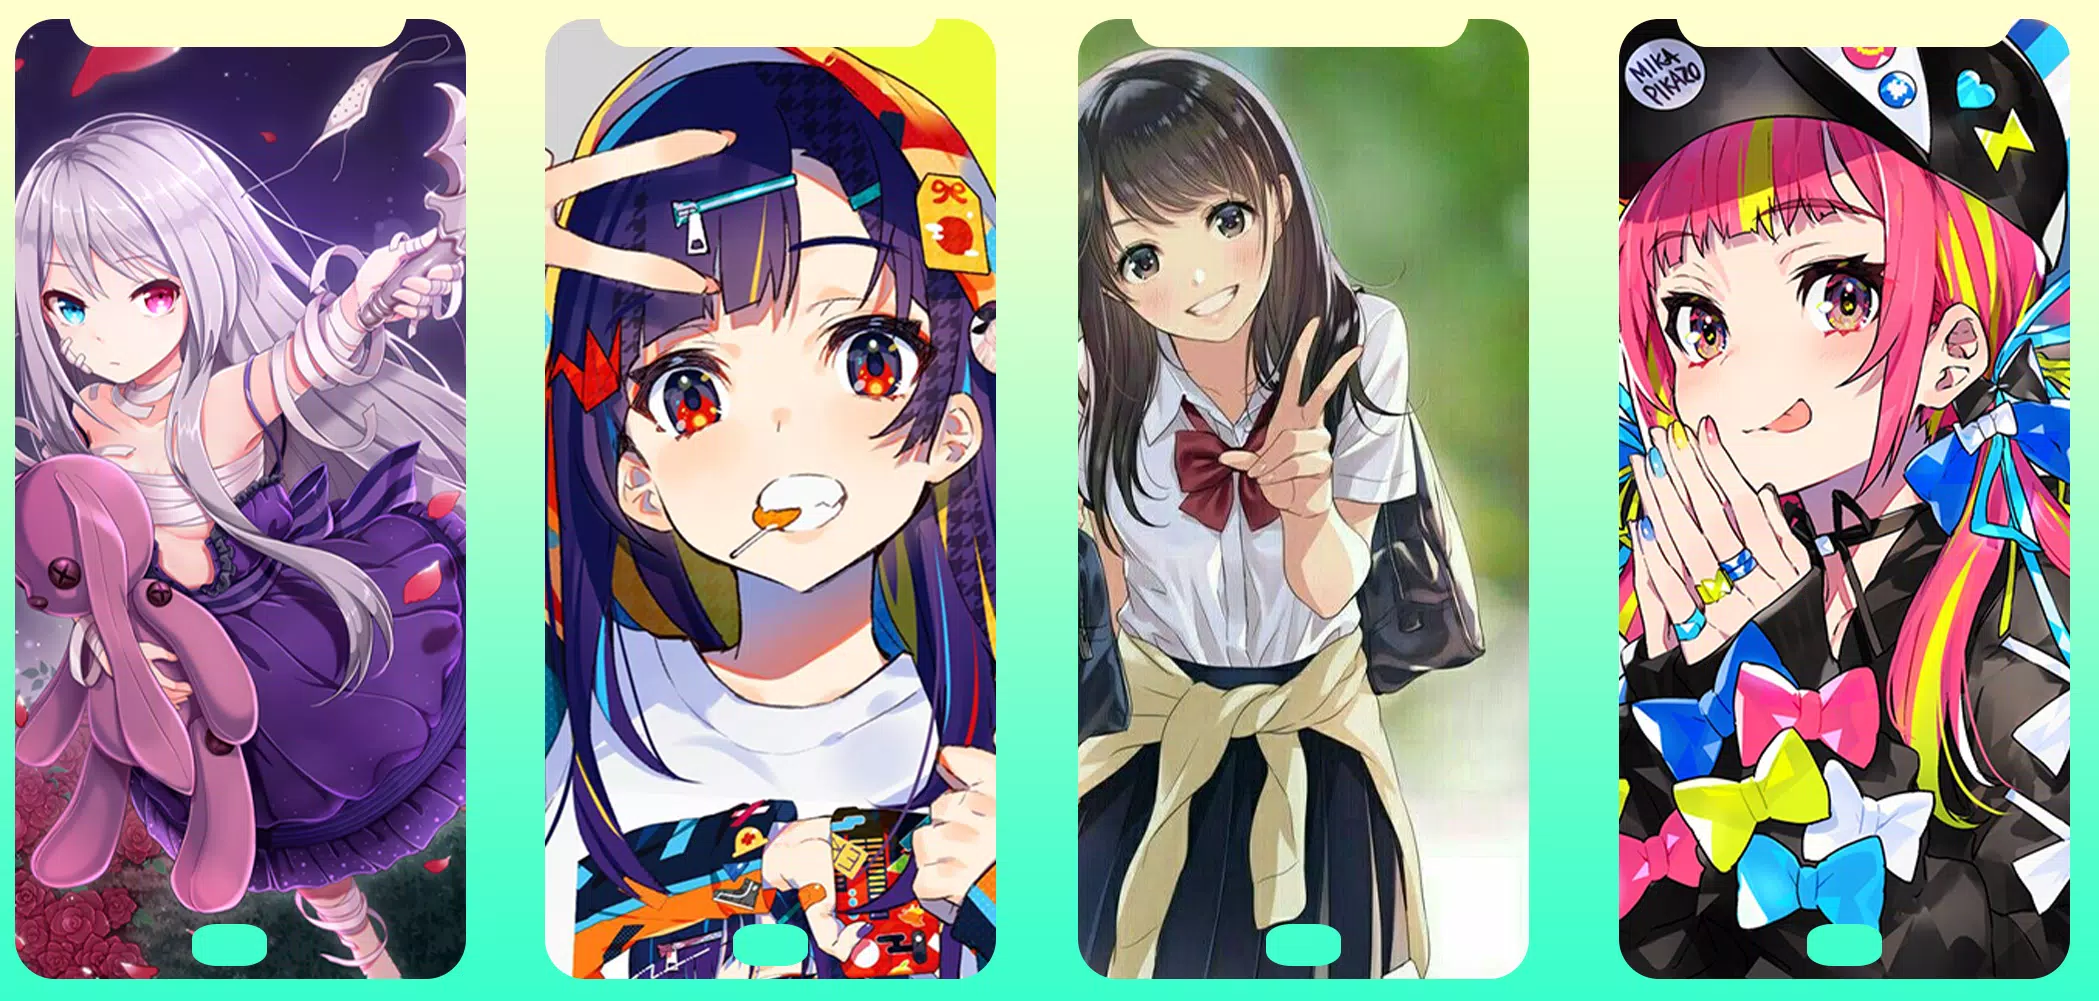 Anime Wallpapers Full HD APK for Android Download